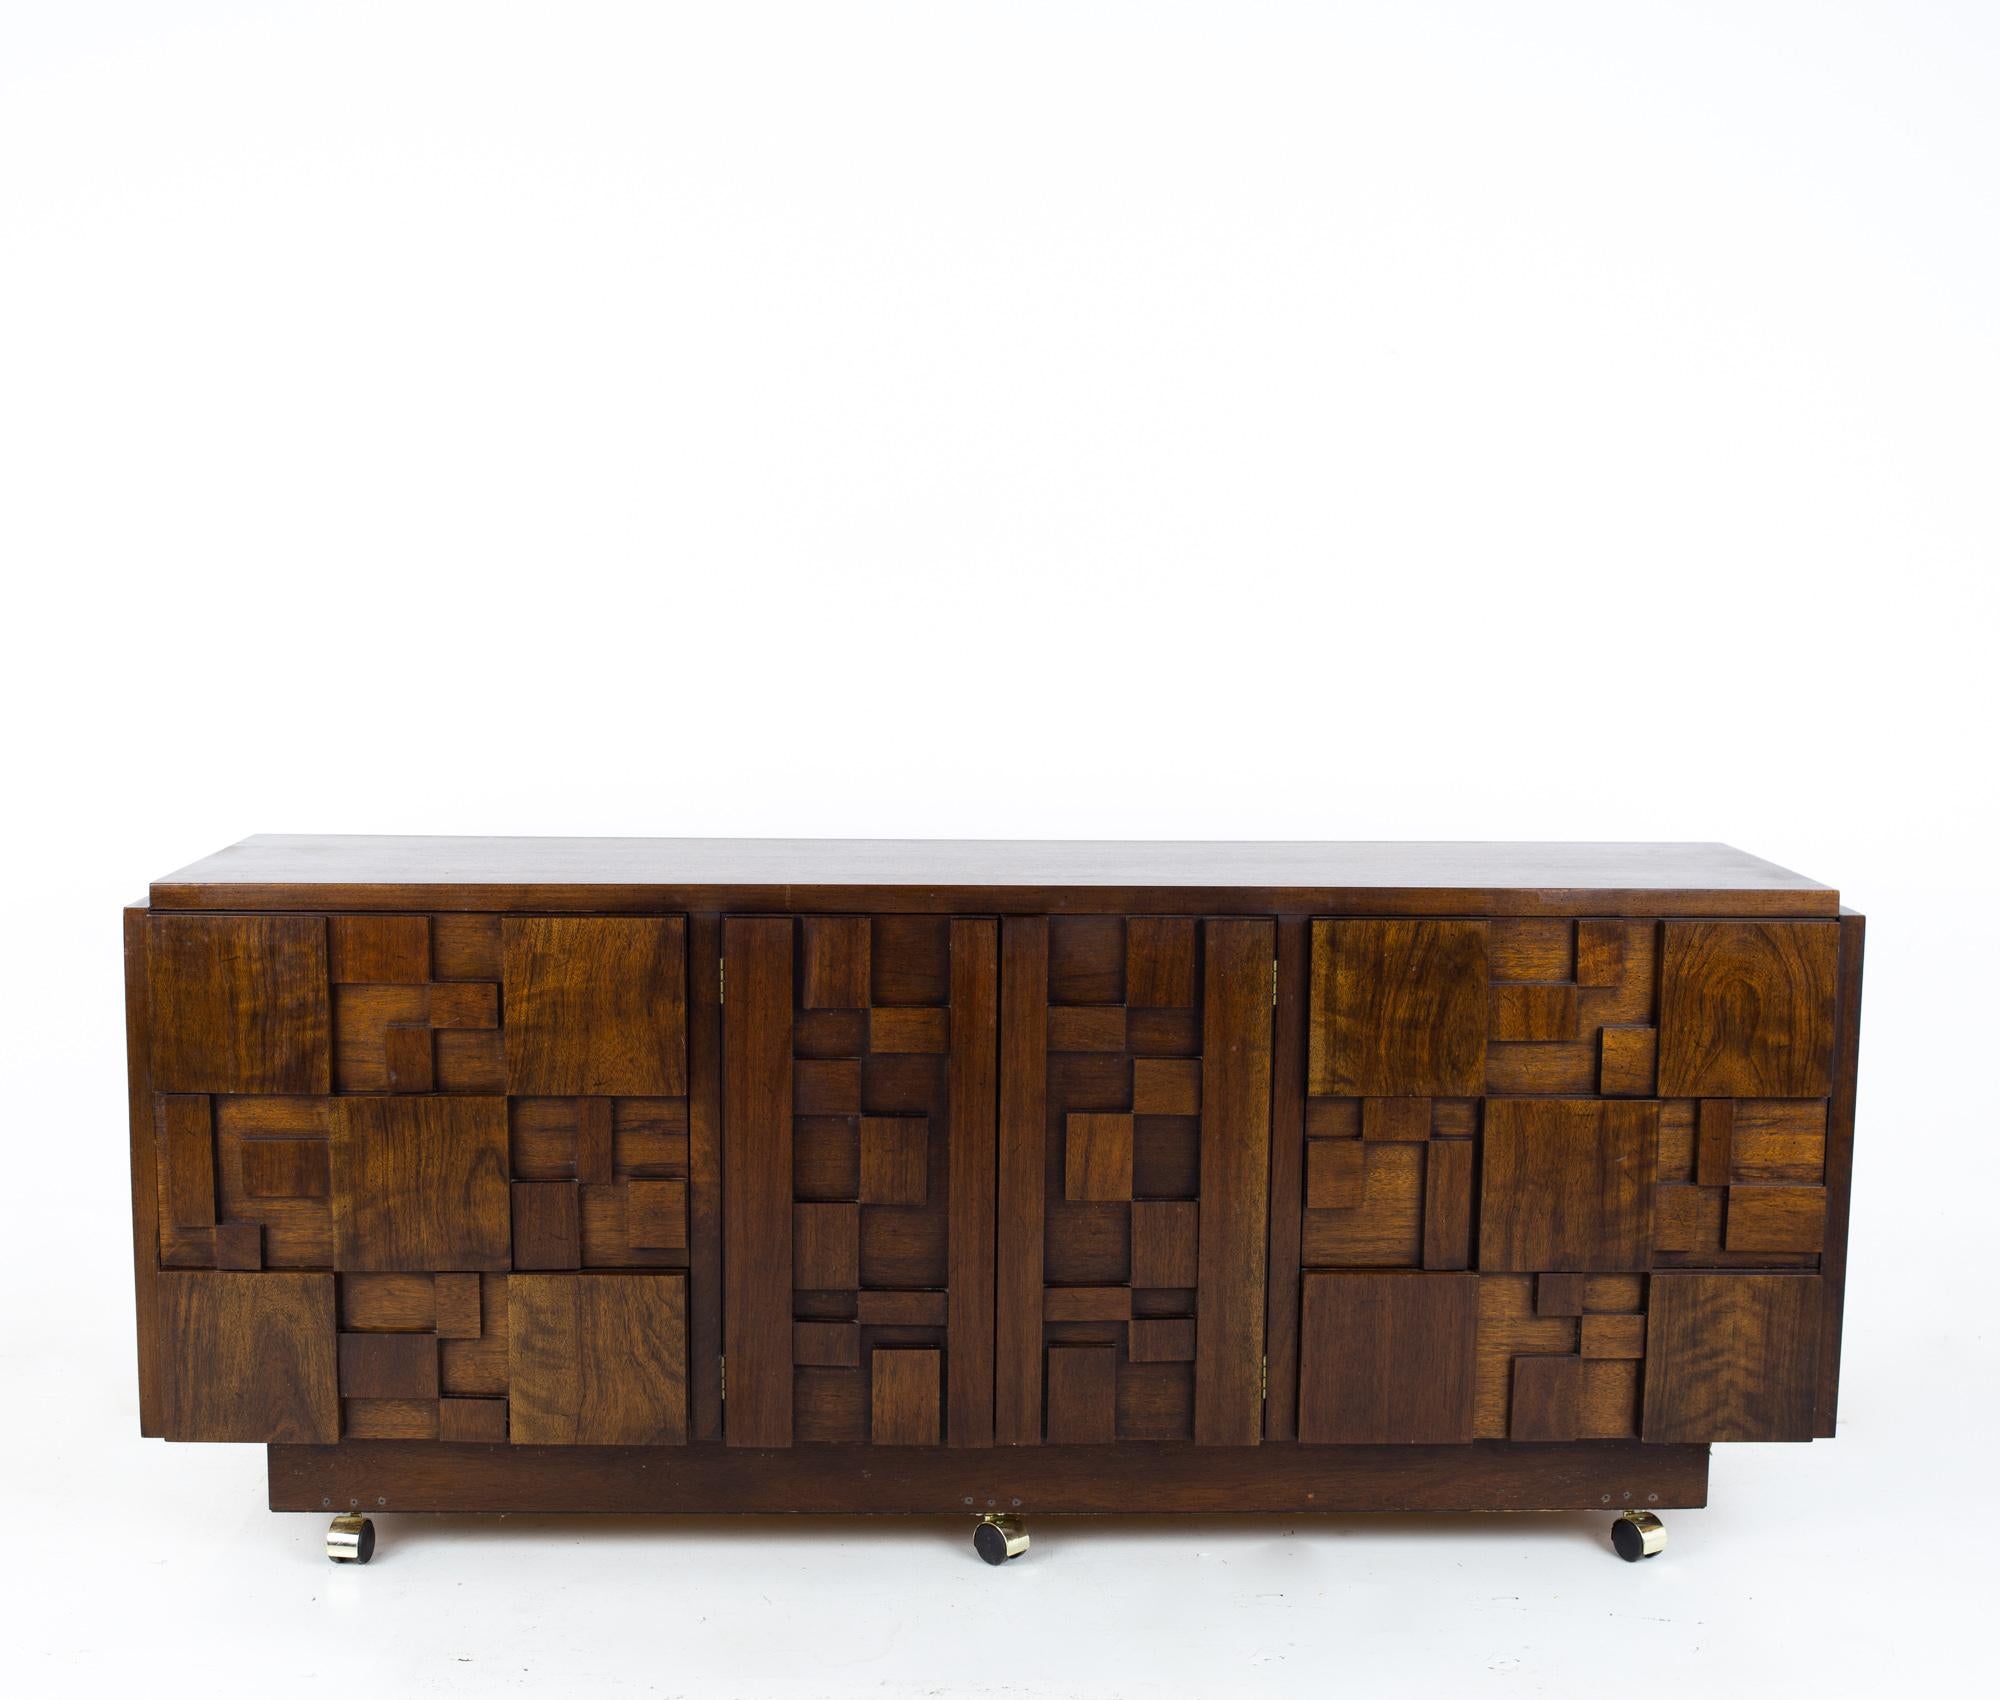 Lane Staccato Brutalist Mid Century 9 Drawer Walnut Lowboy Dresser

Dresser measures: 78 wide x 18.75 deep x 30 inches high

All pieces of furniture can be had in what we call restored vintage condition. That means the piece is restored upon